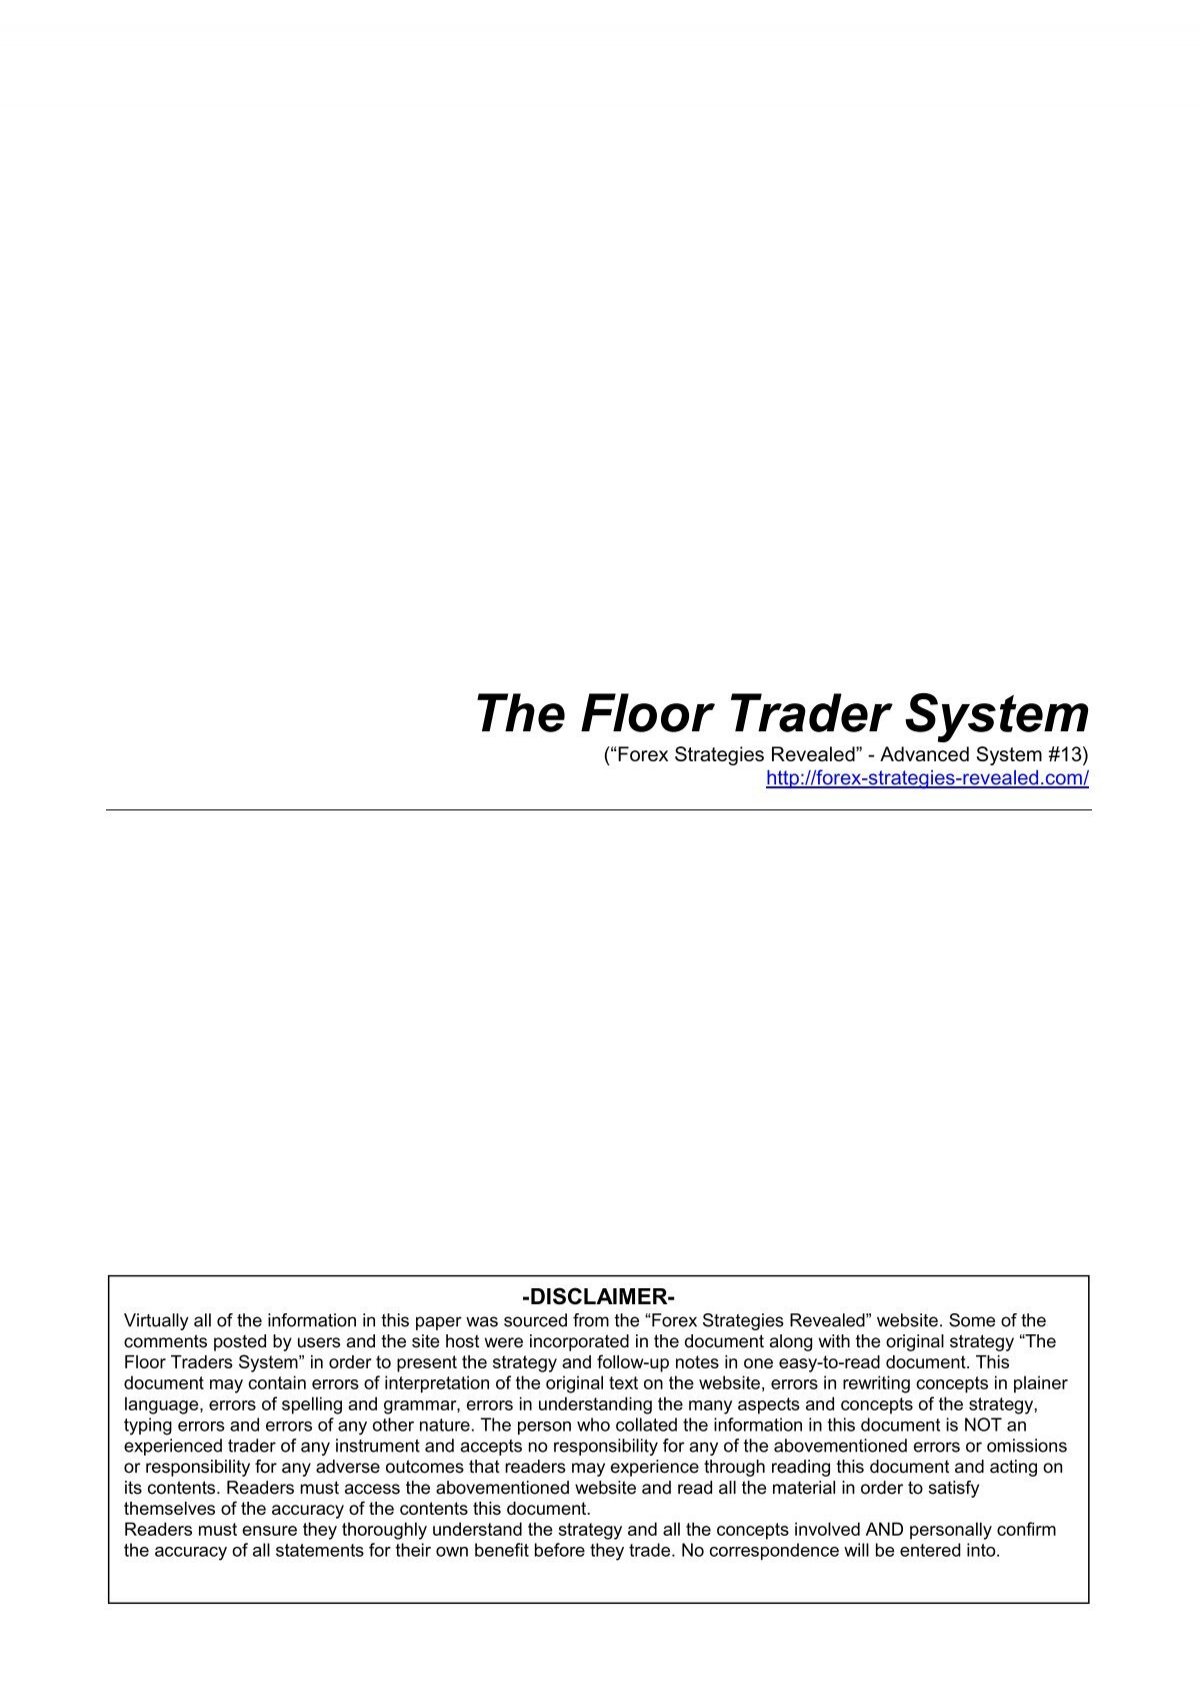 The Floor Trader System Forex Strategies Revealed - 